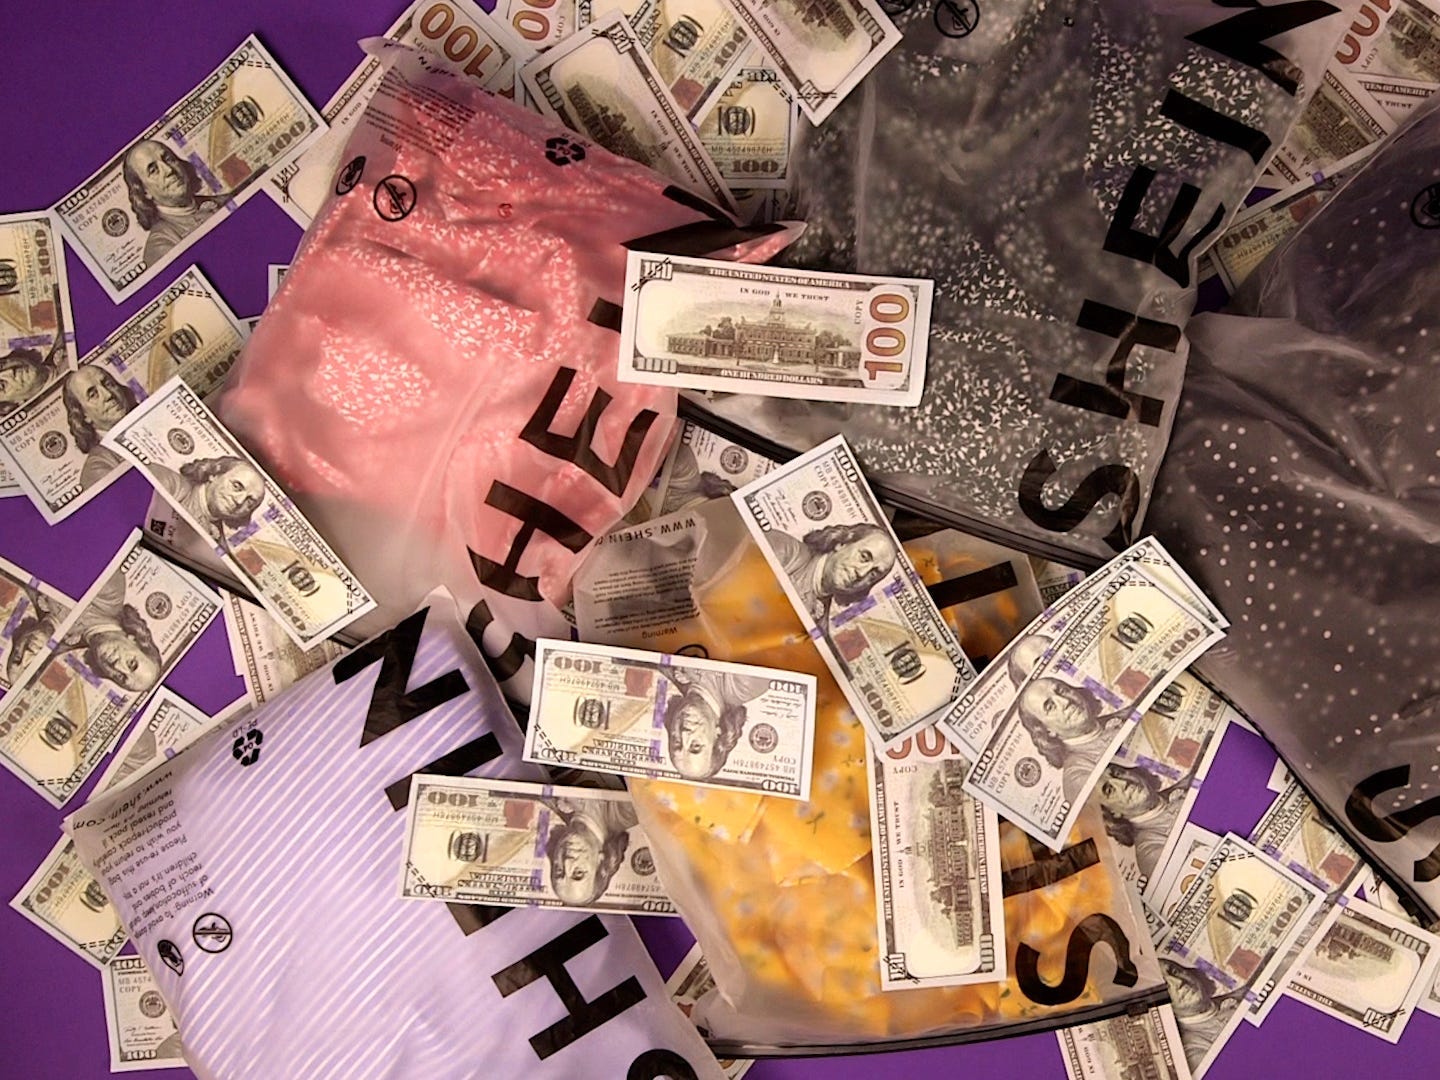 Shein packages with clothes inside, $100 bills thrown on top